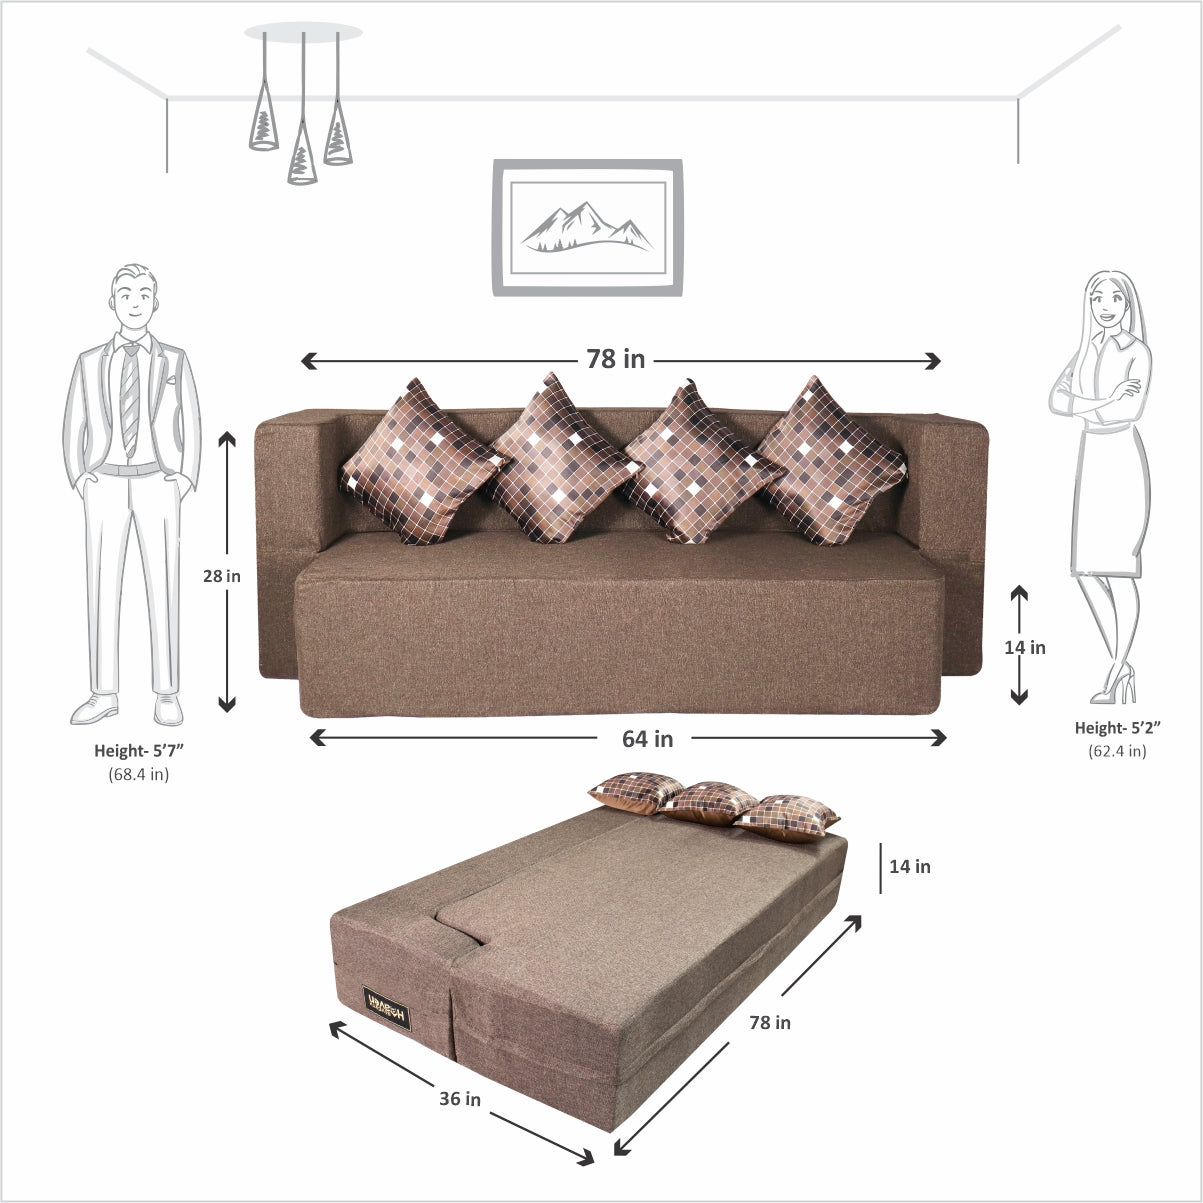 Cover of Brown Jute Fabric (78"x36"x14") FlipperX Sofa cum Bed with 4 Printed Cushion Covers